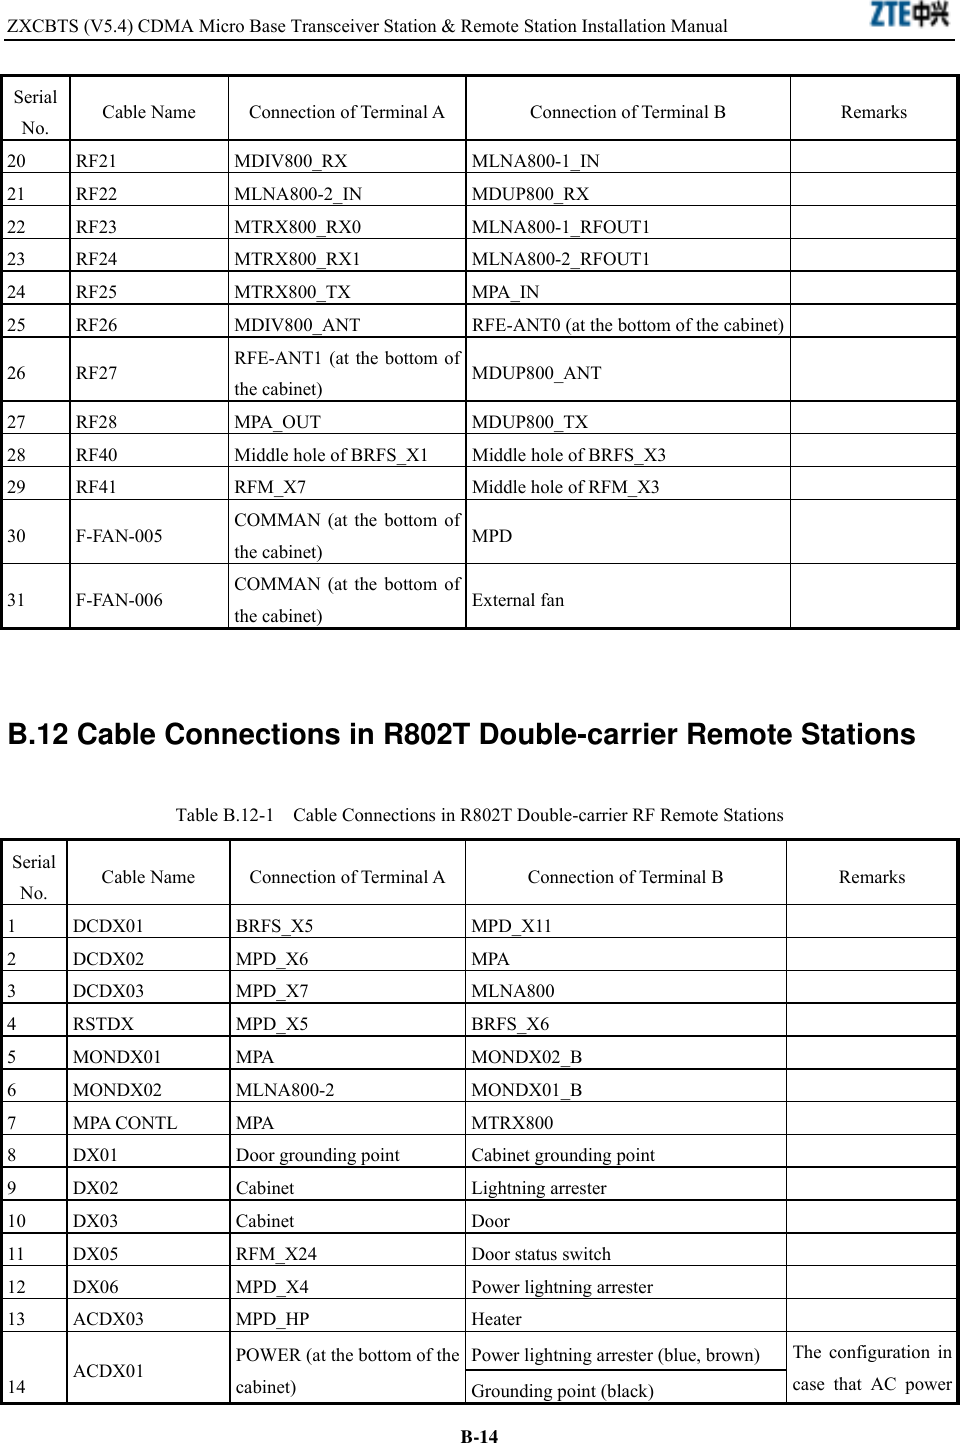 ZXCBTS (V5.4) CDMA Micro Base Transceiver Station &amp; Remote Station Installation Manual    B-14Serial No.  Cable Name  Connection of Terminal A  Connection of Terminal B  Remarks 20 RF21  MDIV800_RX  MLNA800-1_IN   21 RF22  MLNA800-2_IN  MDUP800_RX   22 RF23  MTRX800_RX0  MLNA800-1_RFOUT1   23 RF24  MTRX800_RX1  MLNA800-2_RFOUT1   24 RF25  MTRX800_TX  MPA_IN   25  RF26  MDIV800_ANT  RFE-ANT0 (at the bottom of the cabinet)   26 RF27  RFE-ANT1 (at the bottom of the cabinet)  MDUP800_ANT  27 RF28  MPA_OUT  MDUP800_TX   28  RF40  Middle hole of BRFS_X1  Middle hole of BRFS_X3   29  RF41  RFM_X7  Middle hole of RFM_X3   30 F-FAN-005  COMMAN (at the bottom of the cabinet)  MPD  31 F-FAN-006  COMMAN (at the bottom of the cabinet)  External fan    B.12 Cable Connections in R802T Double-carrier Remote Stations Table B.12-1    Cable Connections in R802T Double-carrier RF Remote Stations Serial No.  Cable Name  Connection of Terminal A  Connection of Terminal B  Remarks 1 DCDX01  BRFS_X5  MPD_X11   2 DCDX02  MPD_X6  MPA   3 DCDX03  MPD_X7  MLNA800   4 RSTDX  MPD_X5  BRFS_X6   5 MONDX01  MPA  MONDX02_B   6 MONDX02  MLNA800-2  MONDX01_B   7 MPA CONTL MPA  MTRX800   8  DX01  Door grounding point  Cabinet grounding point   9 DX02  Cabinet  Lightning arrester    10 DX03  Cabinet  Door   11  DX05  RFM_X24  Door status switch   12  DX06  MPD_X4  Power lightning arrester   13 ACDX03  MPD_HP  Heater   Power lightning arrester (blue, brown)  14  ACDX01  POWER (at the bottom of the cabinet)  Grounding point (black) The configuration in case that AC power 